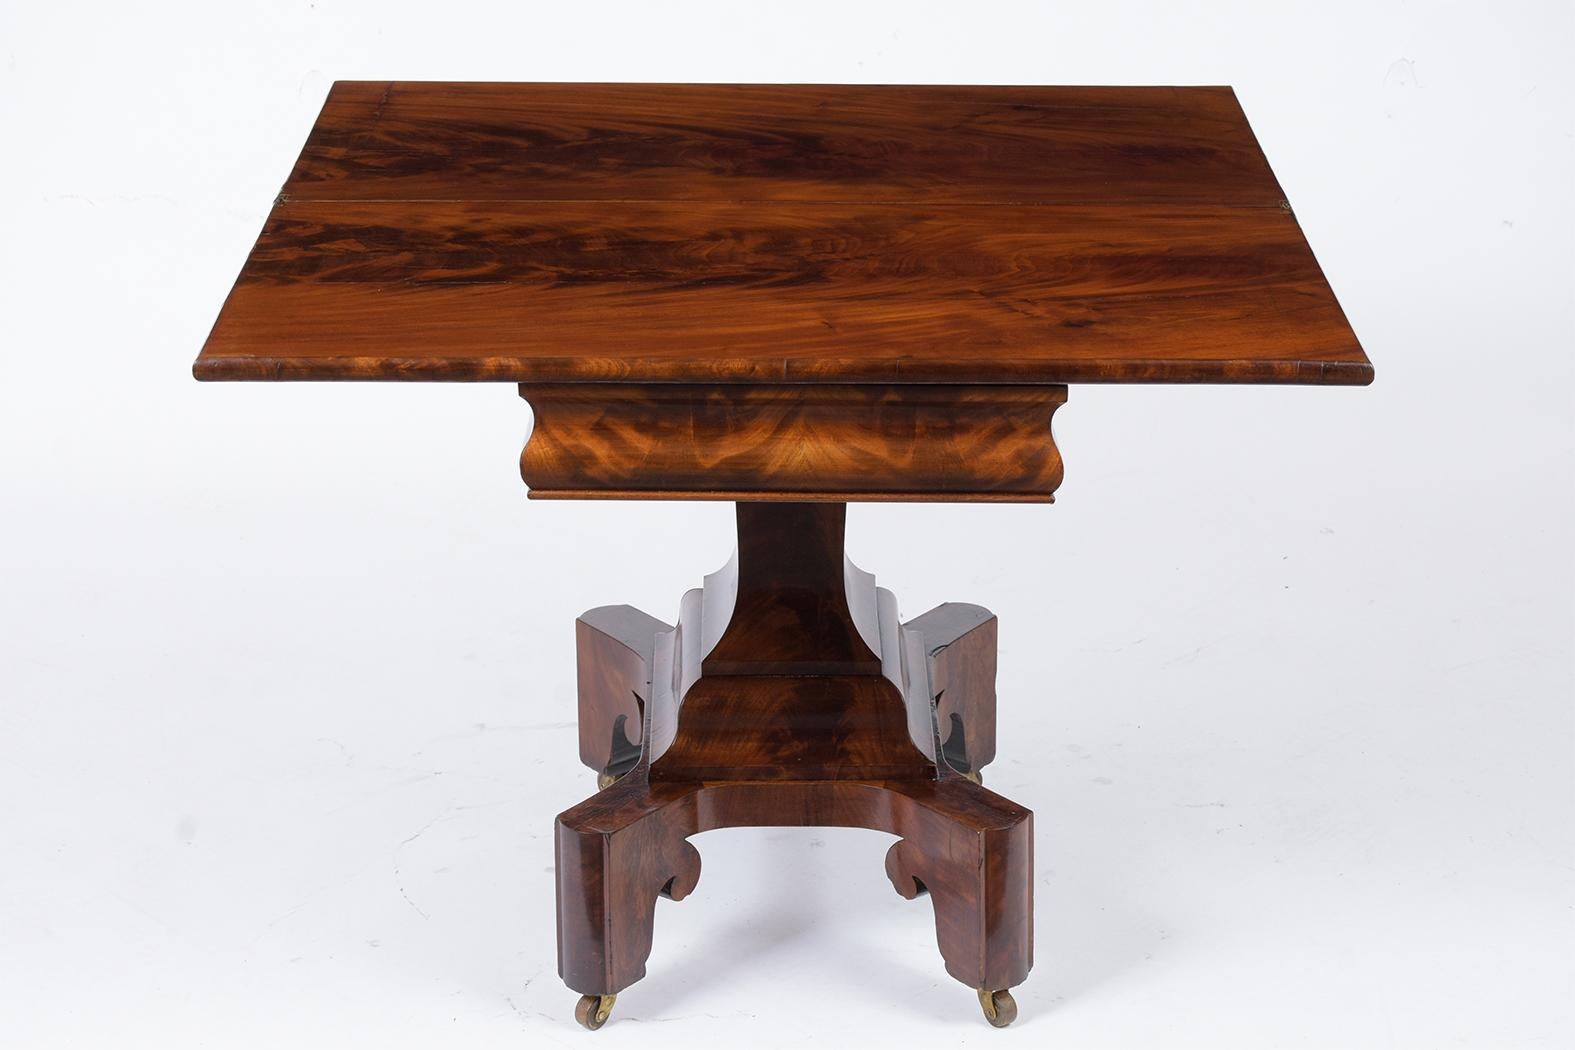 This French Late 19th-Century Empire Card Table has been restored and is made out of solid oak wood covered in Flemish mahogany veneers with a newly waxed patina finish. The top opens to set up as a game table, has an interior space for storage, and